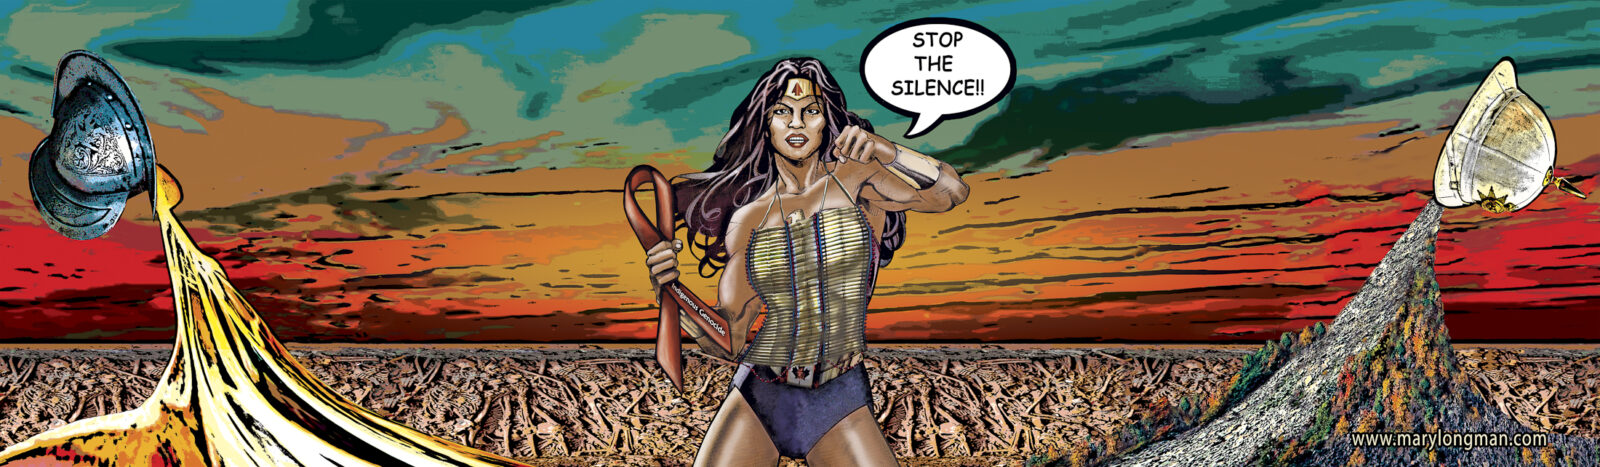 Warrior Woman: Stop the Silence!, 